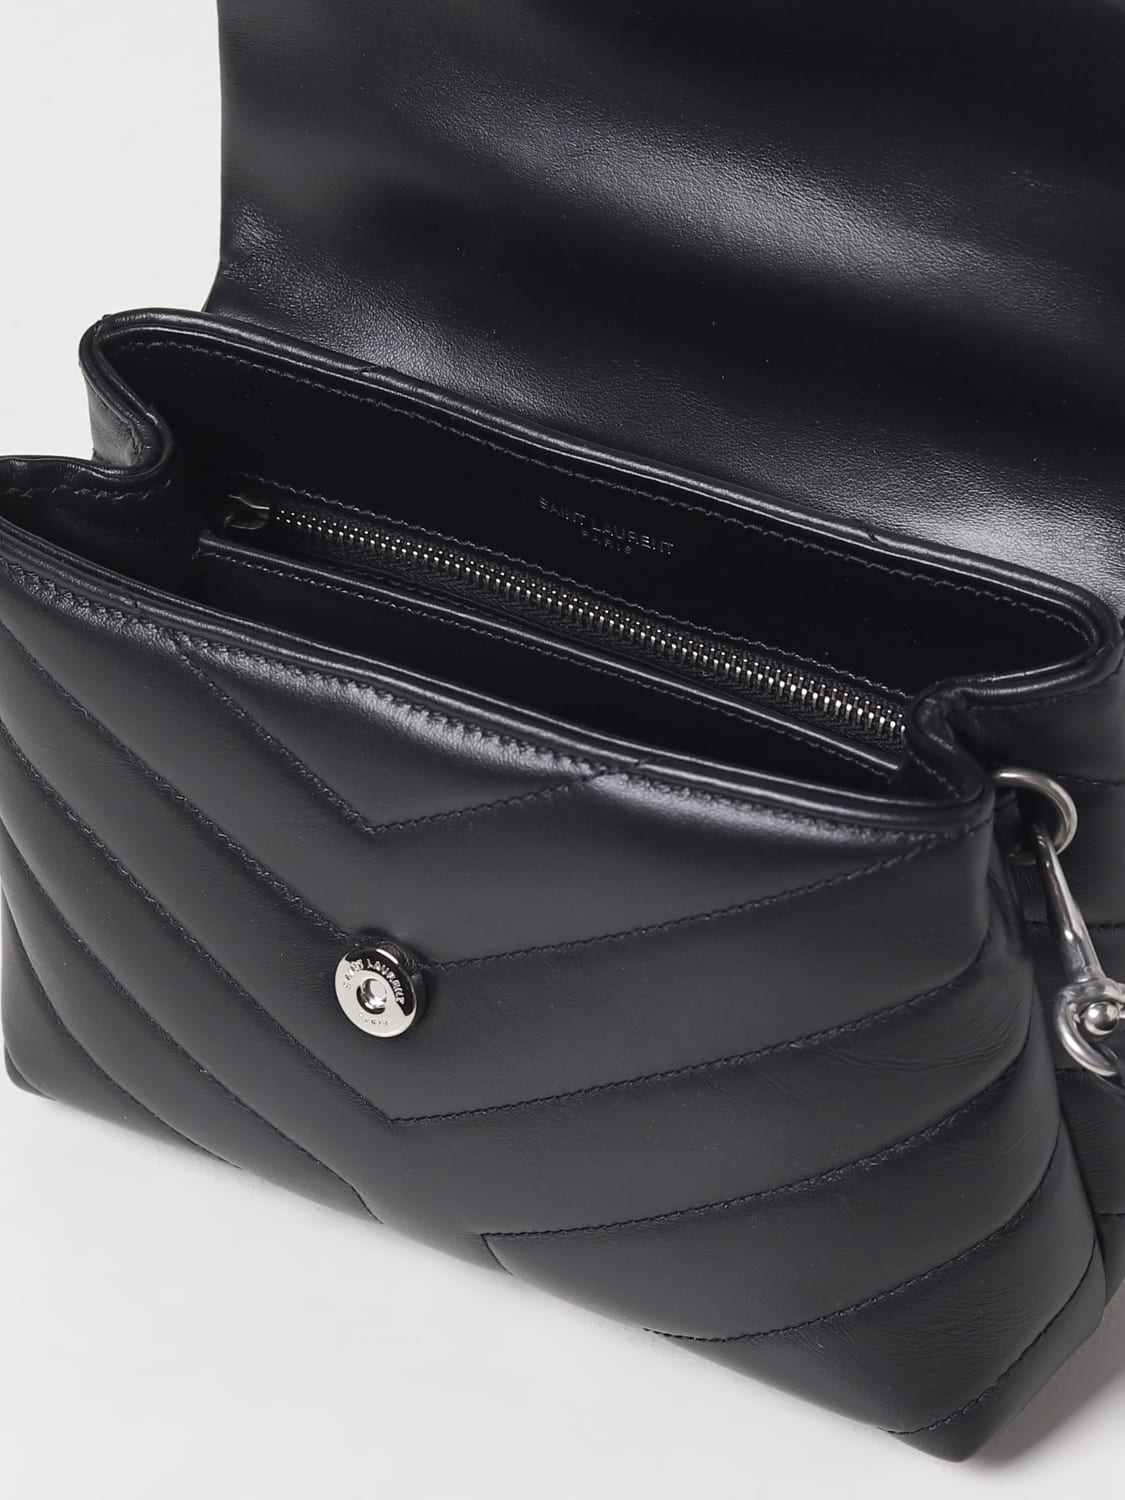 Saint Laurent Toy Loulou Bag in Quilted Leather